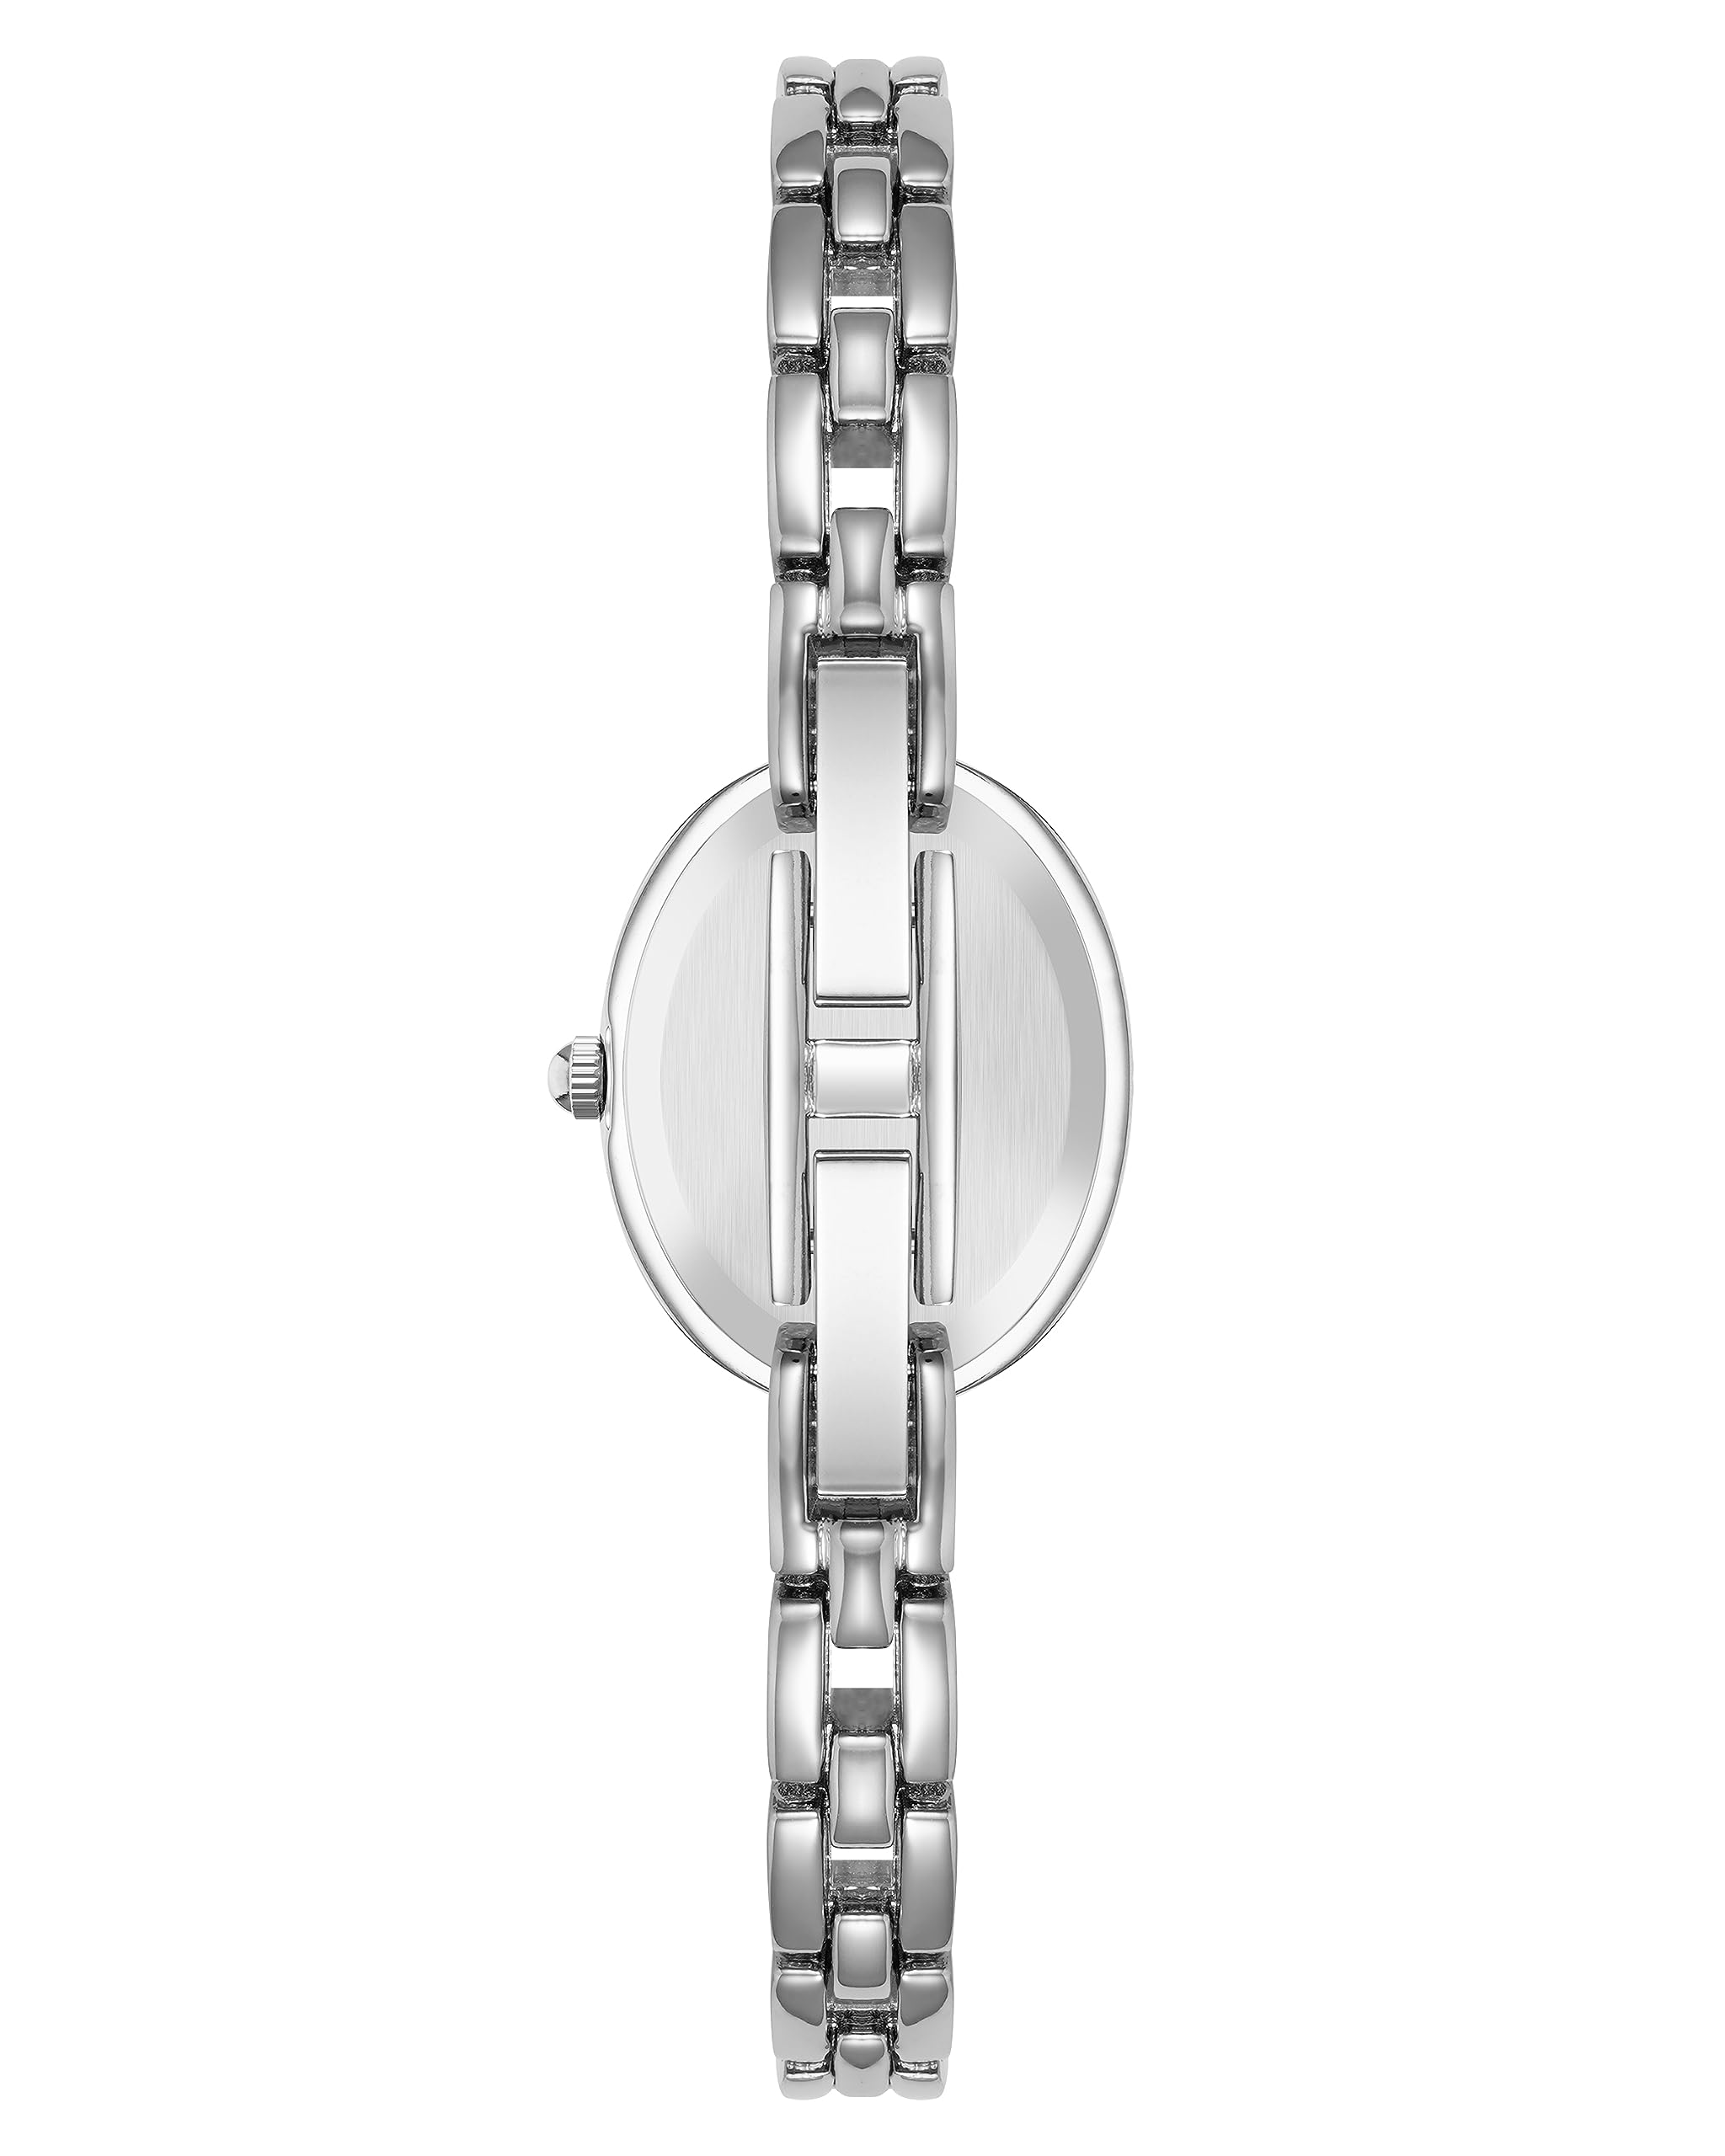 Armitron Women's Crystal Accented Bangle Watch, 75/5903